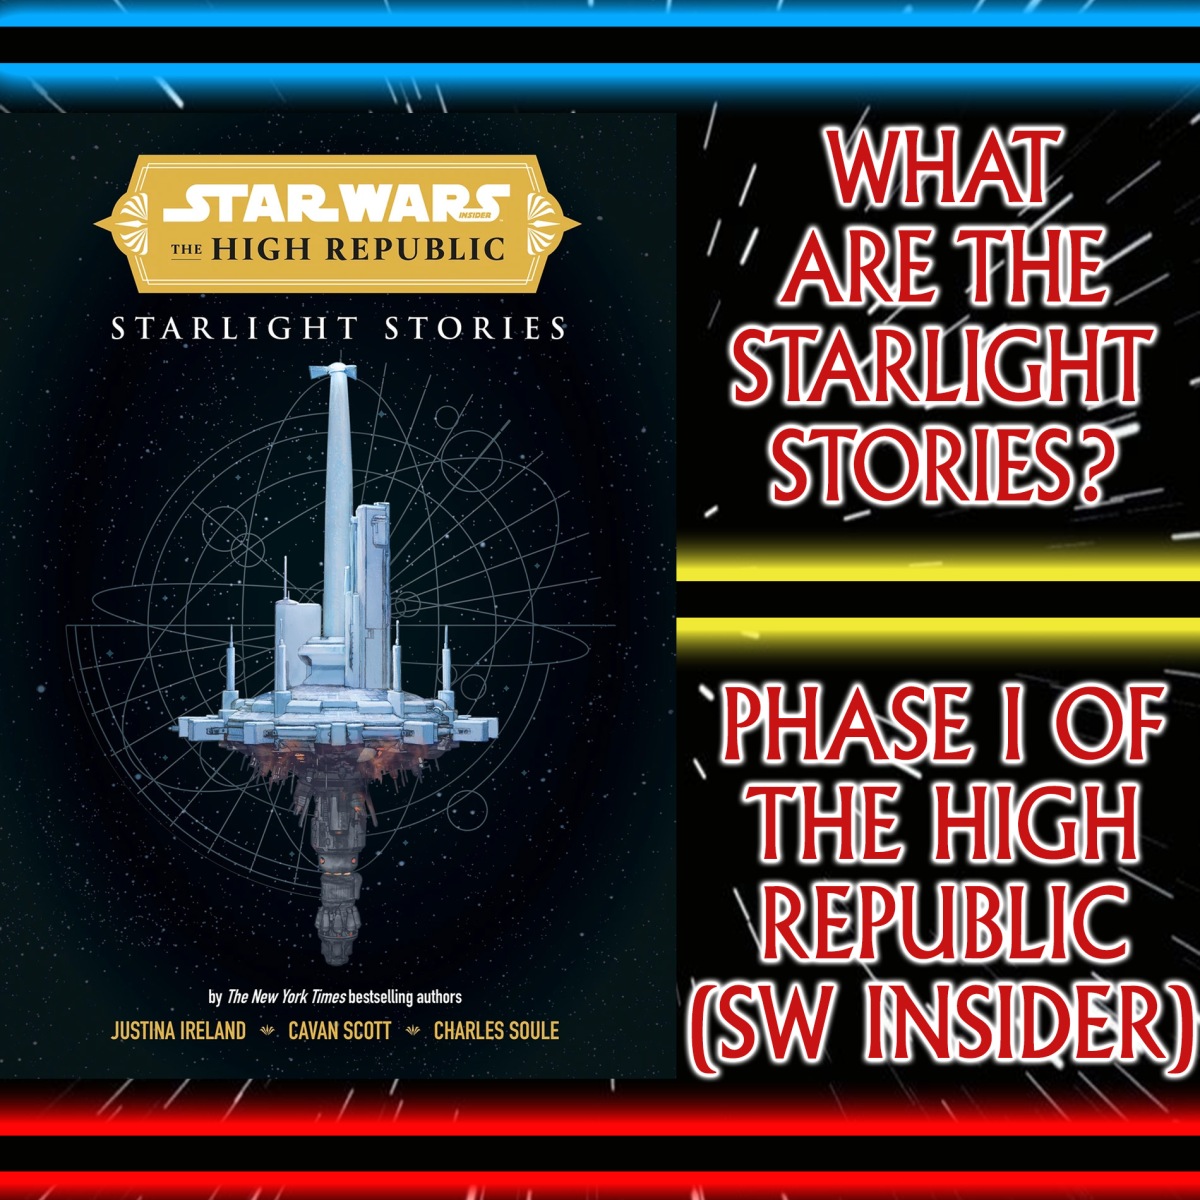 Star Wars: Comics In Canon – What Are The Starlight Stories? Finishing Phase 1 Of The High Republic (Star Wars Insider) – Ep 113